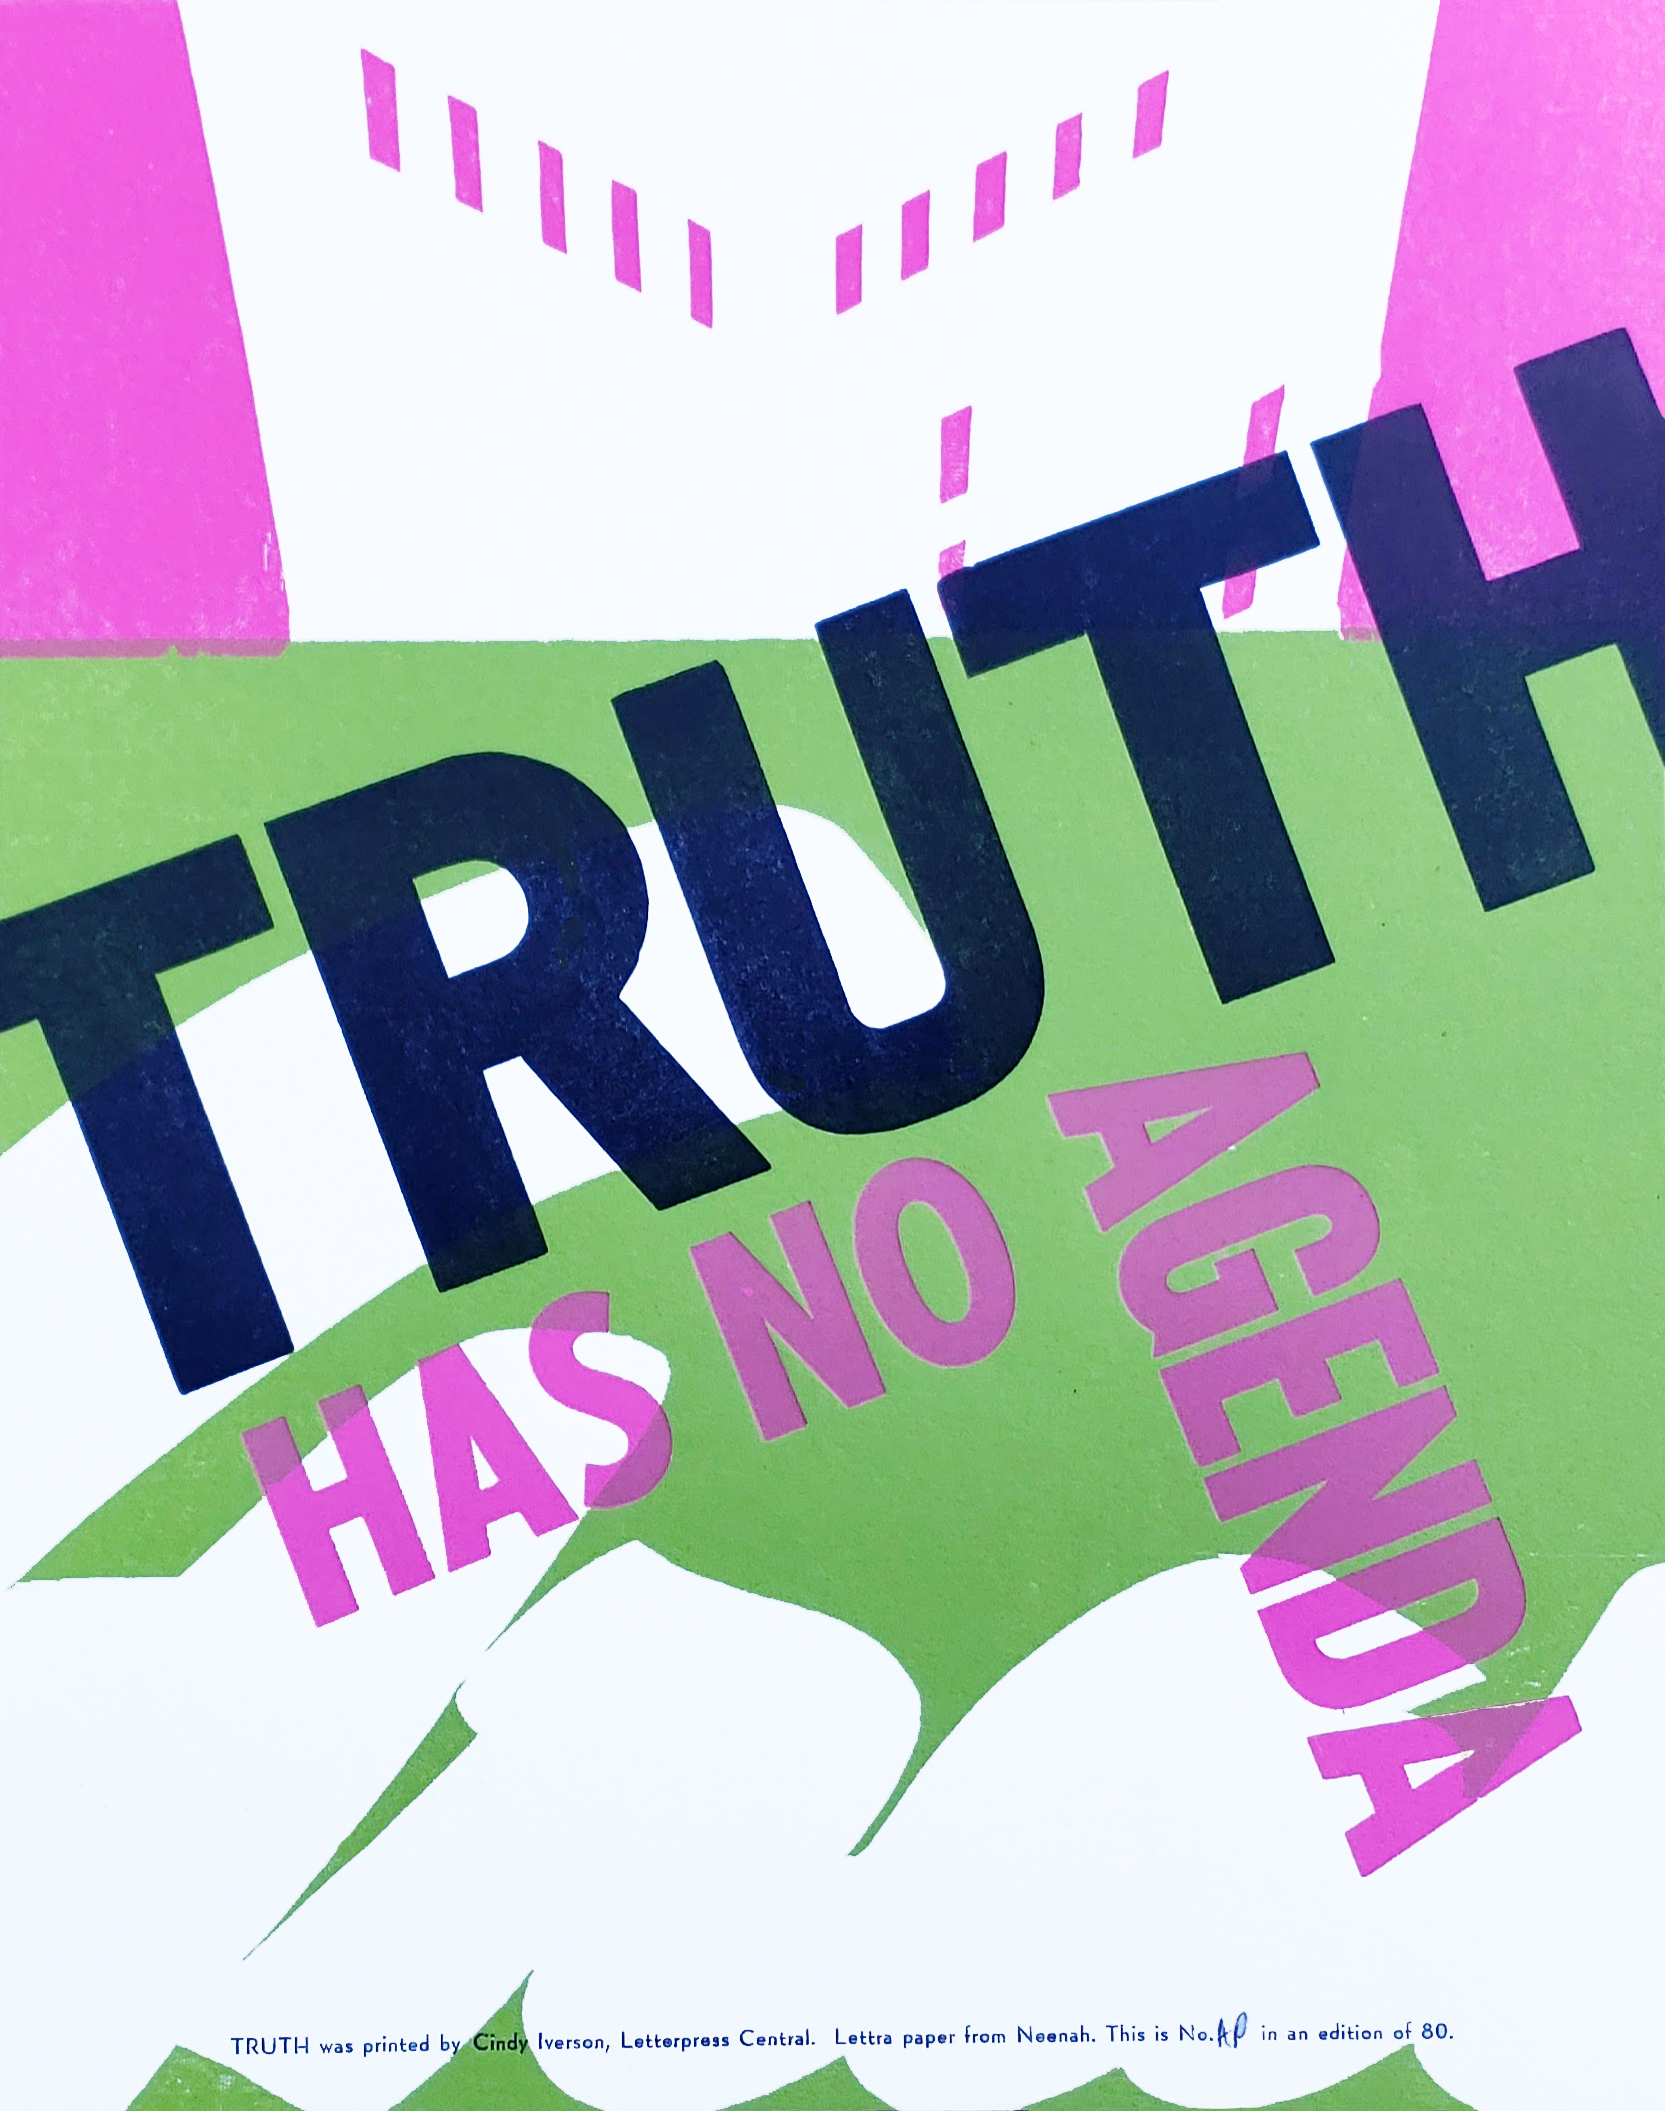 Truth has no agenda by Cindy Iverson